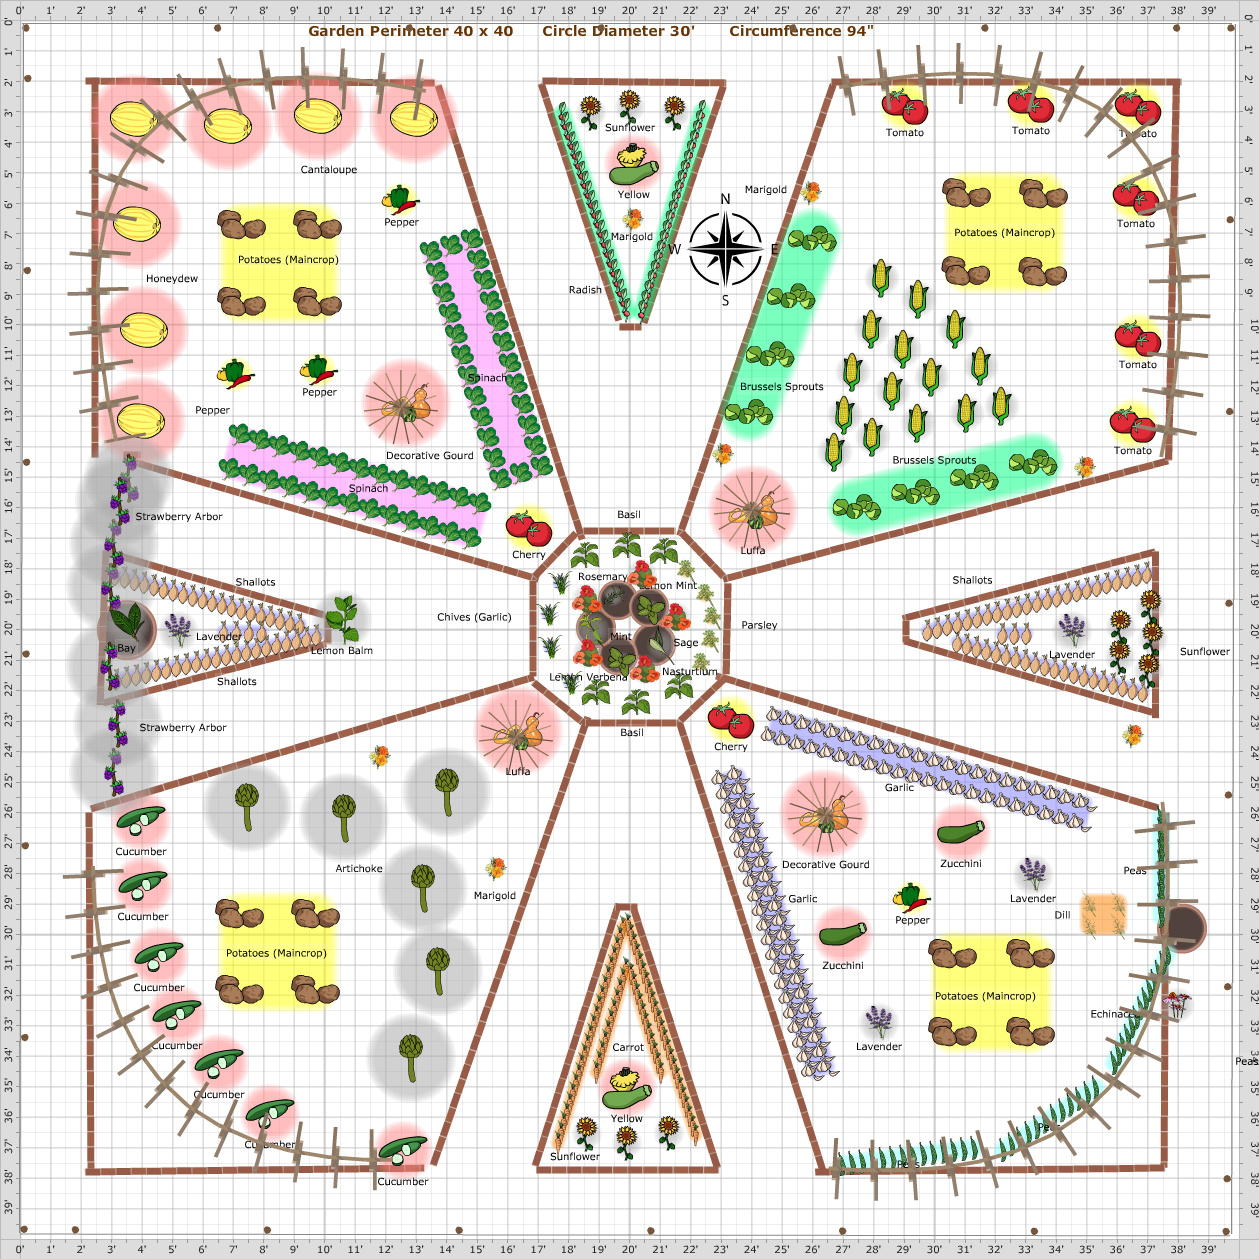 circlevegtable garden layout planner with pond in middle